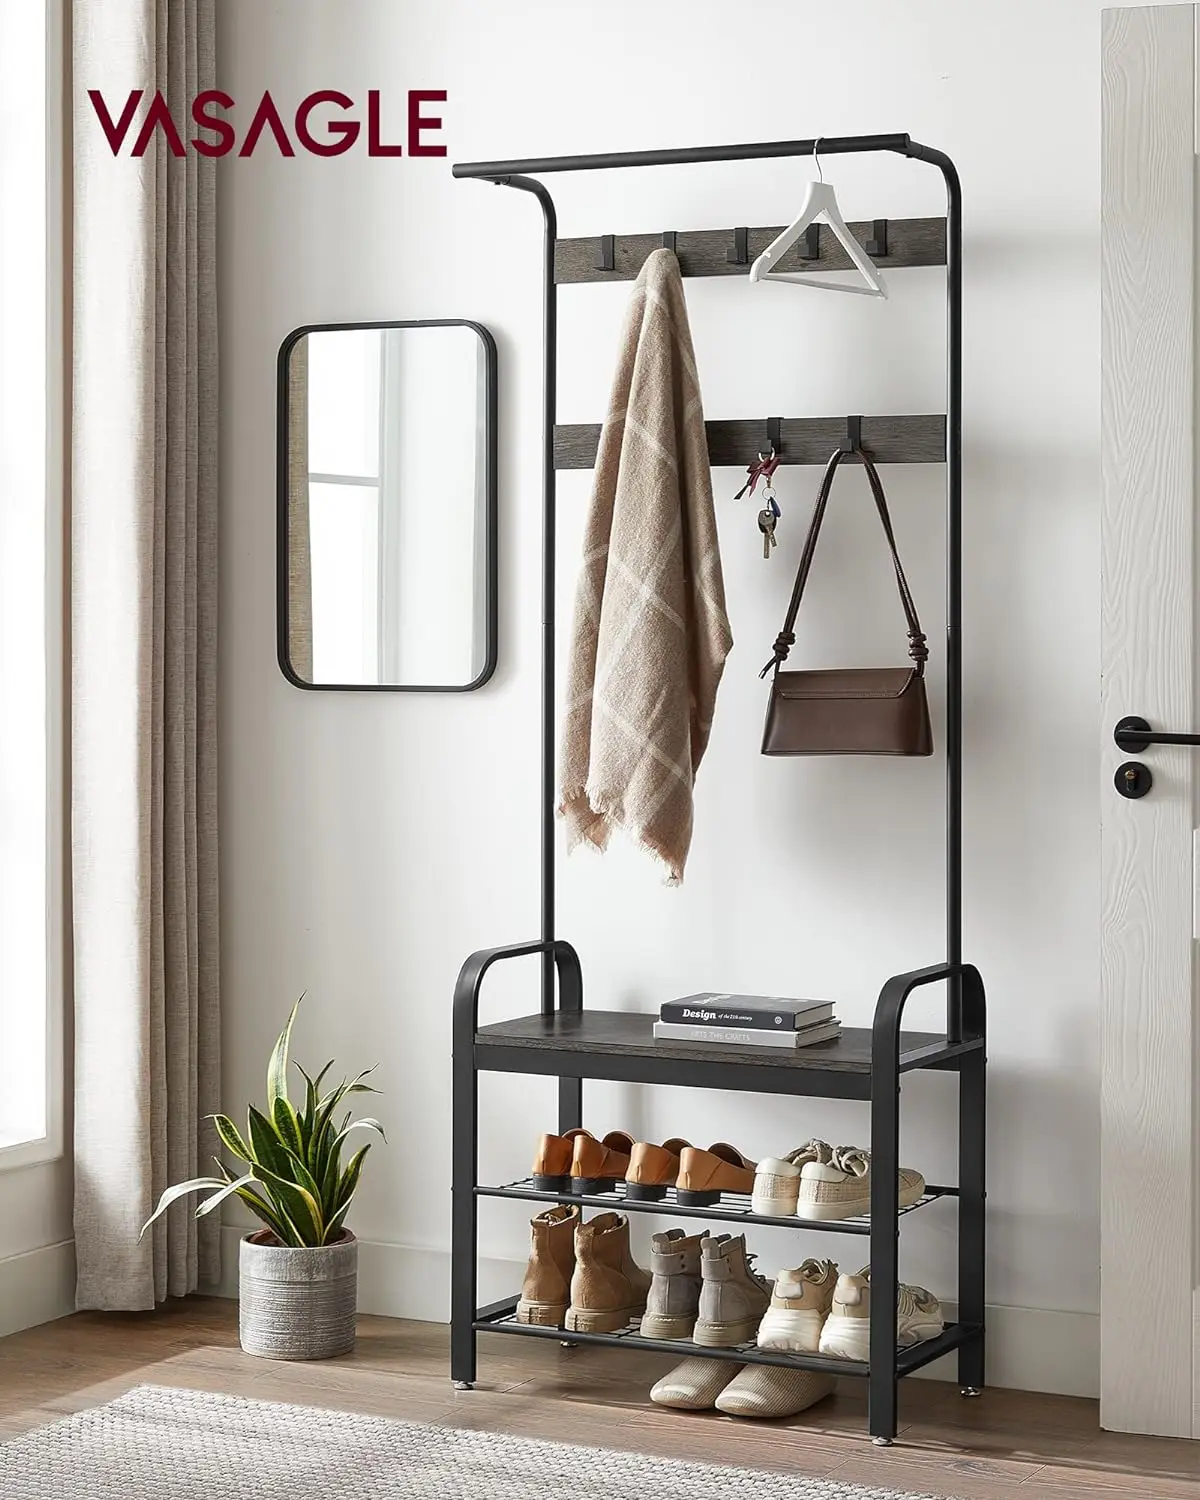 

Coat Rack, 4-in-1, with 9 Removable Hooks, a Hanging Rod, 13.3 x 28.3 x 72.1 Inches, Charcoal Gray and Black